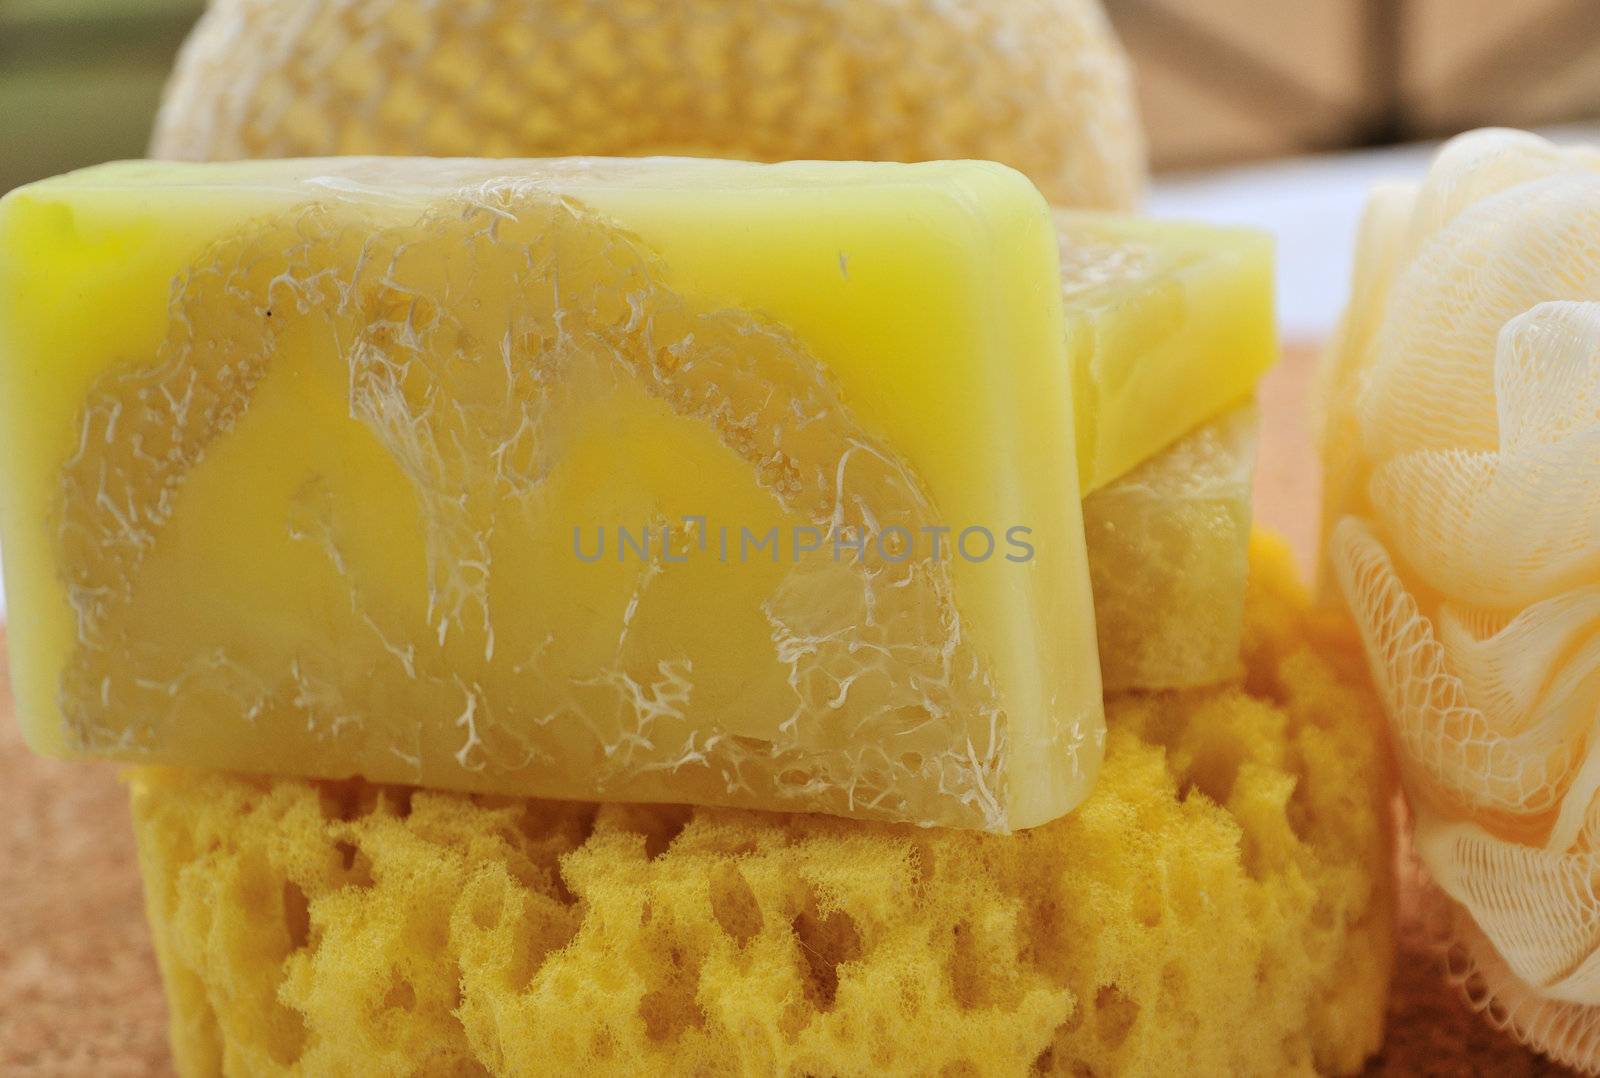 Yellow hand-made soap is made from natural components